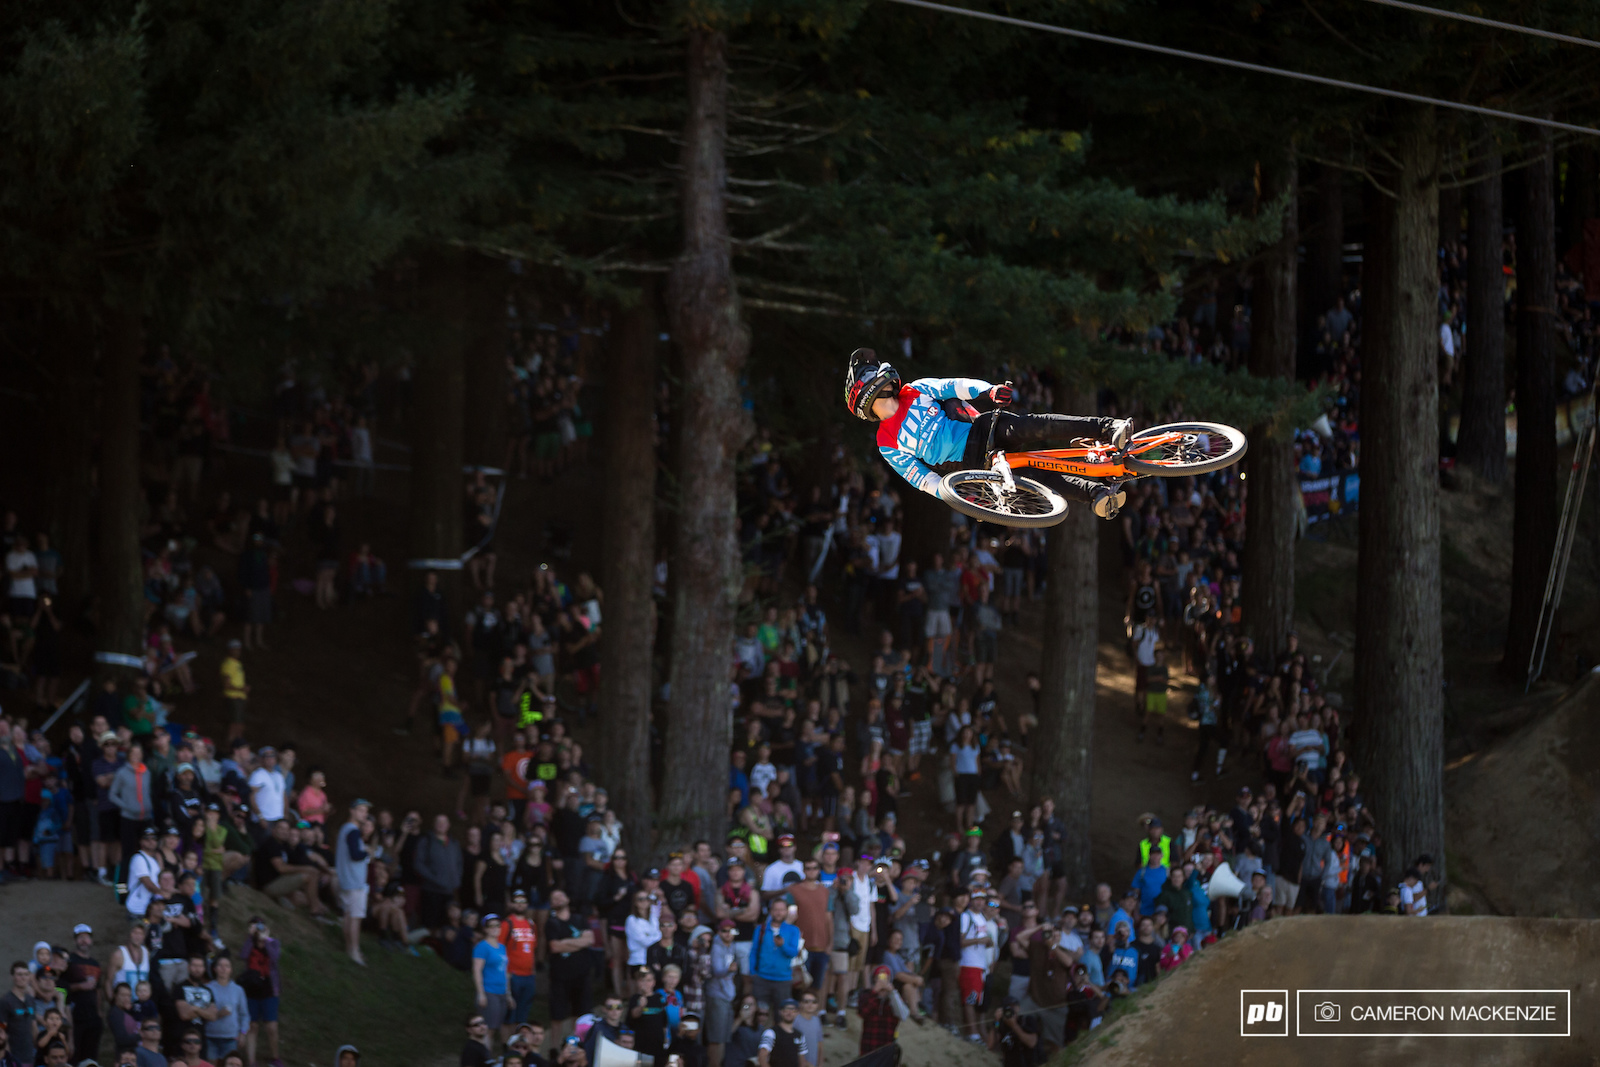 Sam Reynolds flatting it out over the crowd